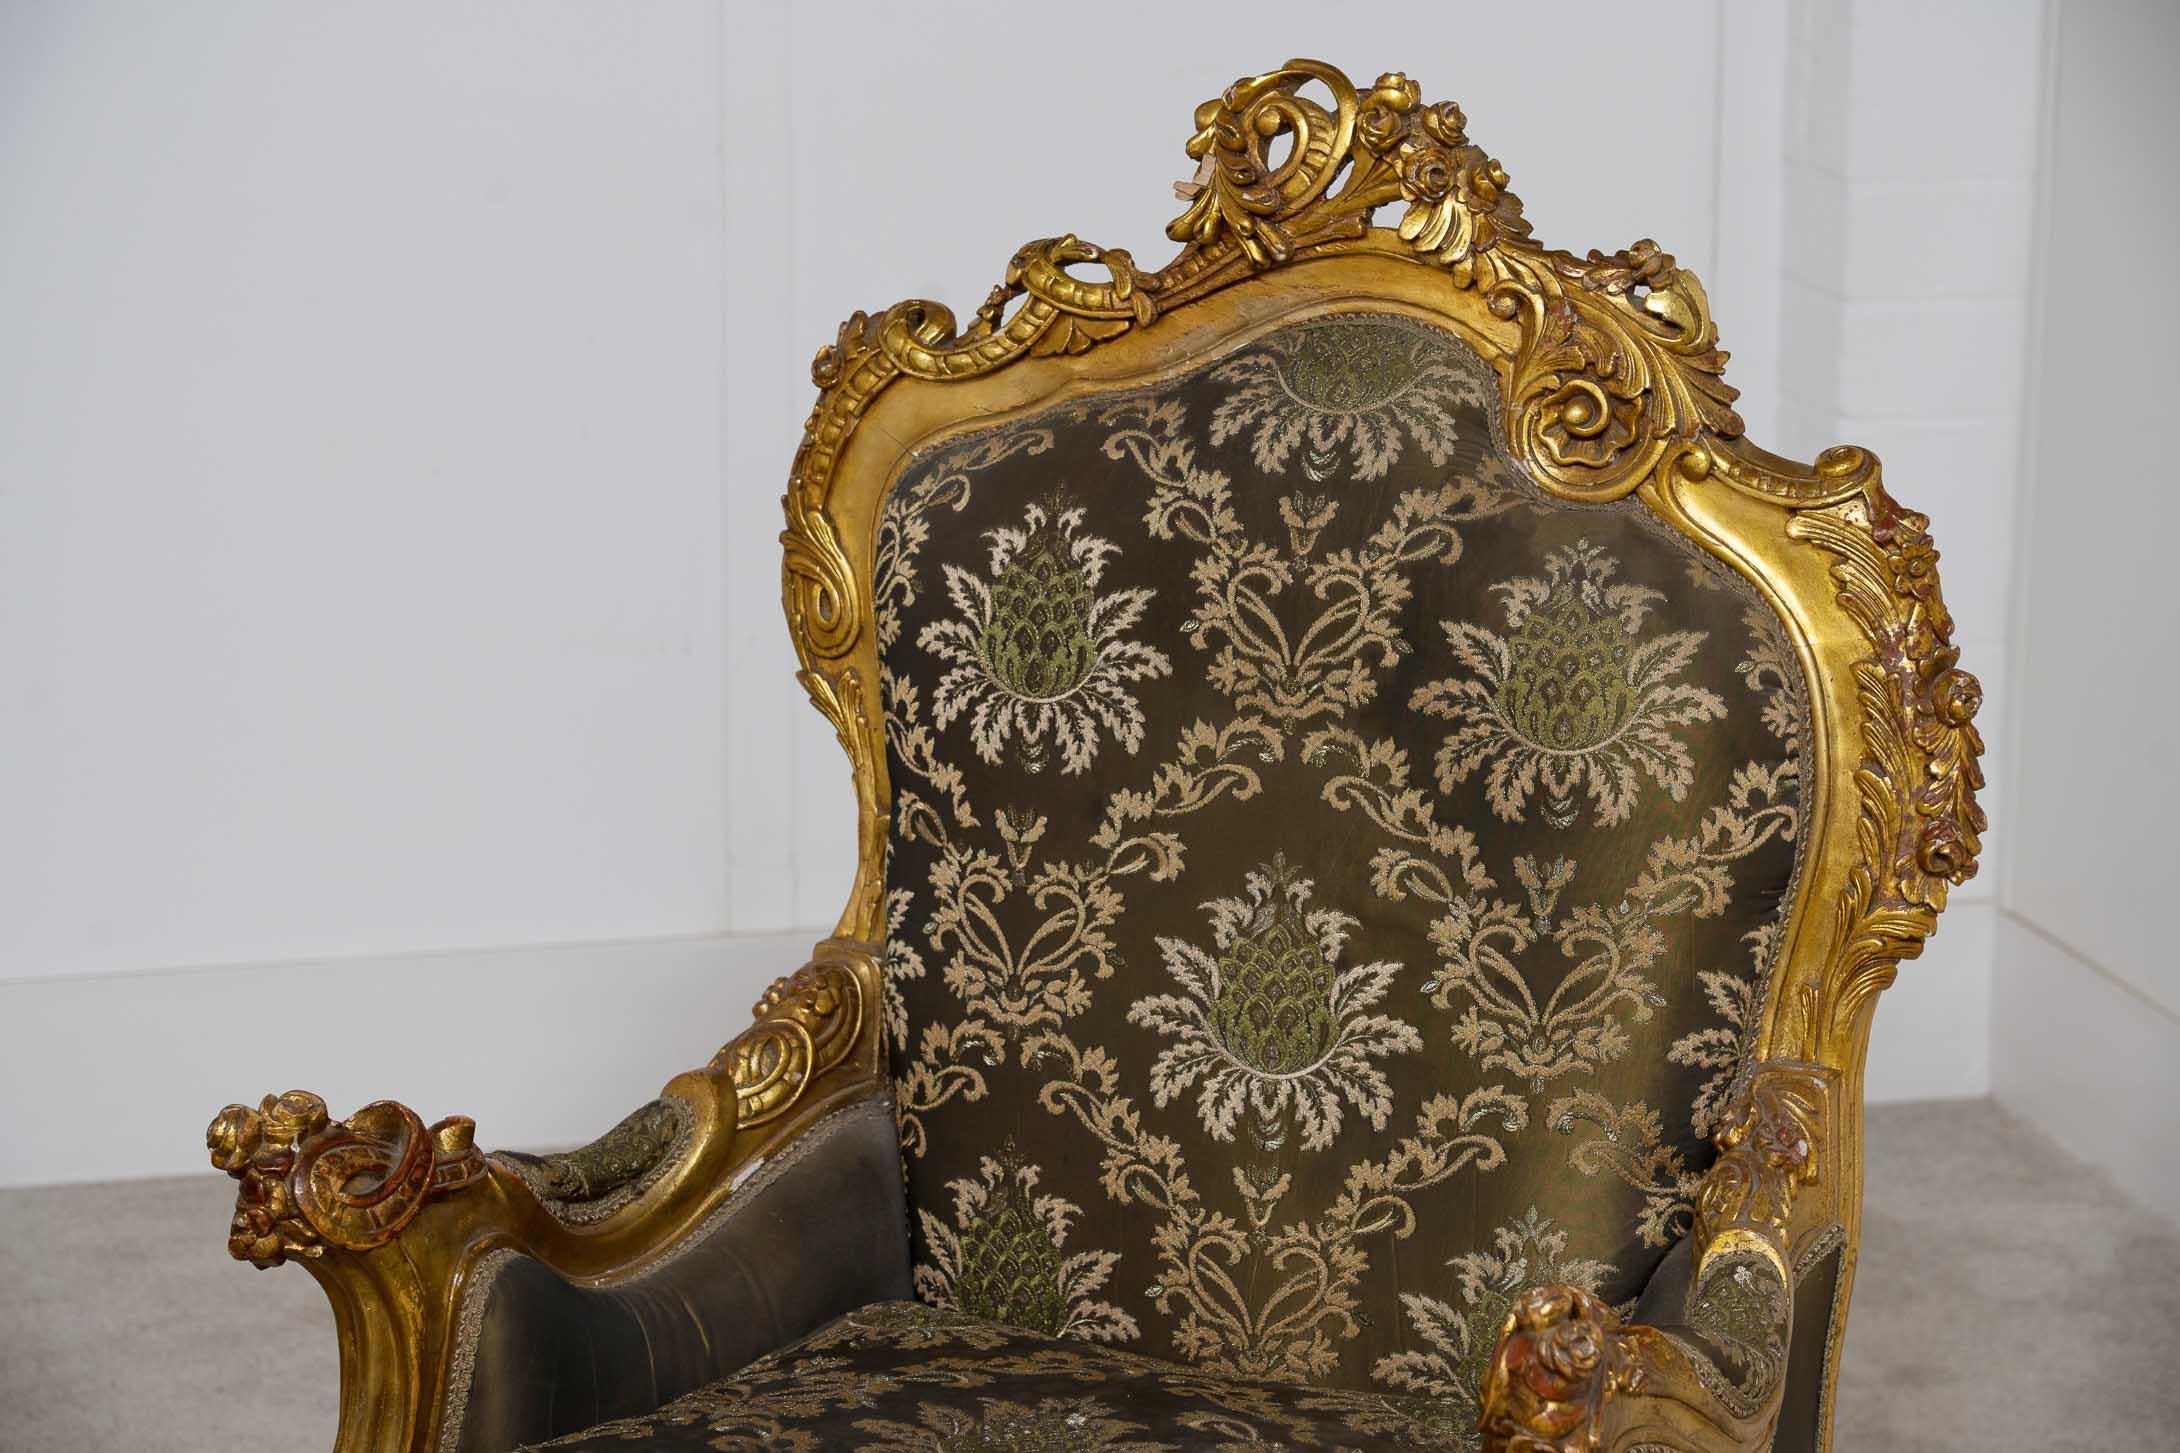 Classic pair of French antique arm chairs in the Louis XVI manner Hand crafted from gilt with upholstered arms
Freshly re-upholstered with woven floral pattern
Bought from a dealer on Rue de Rossiers at the Paris antiques markets
Great interiors